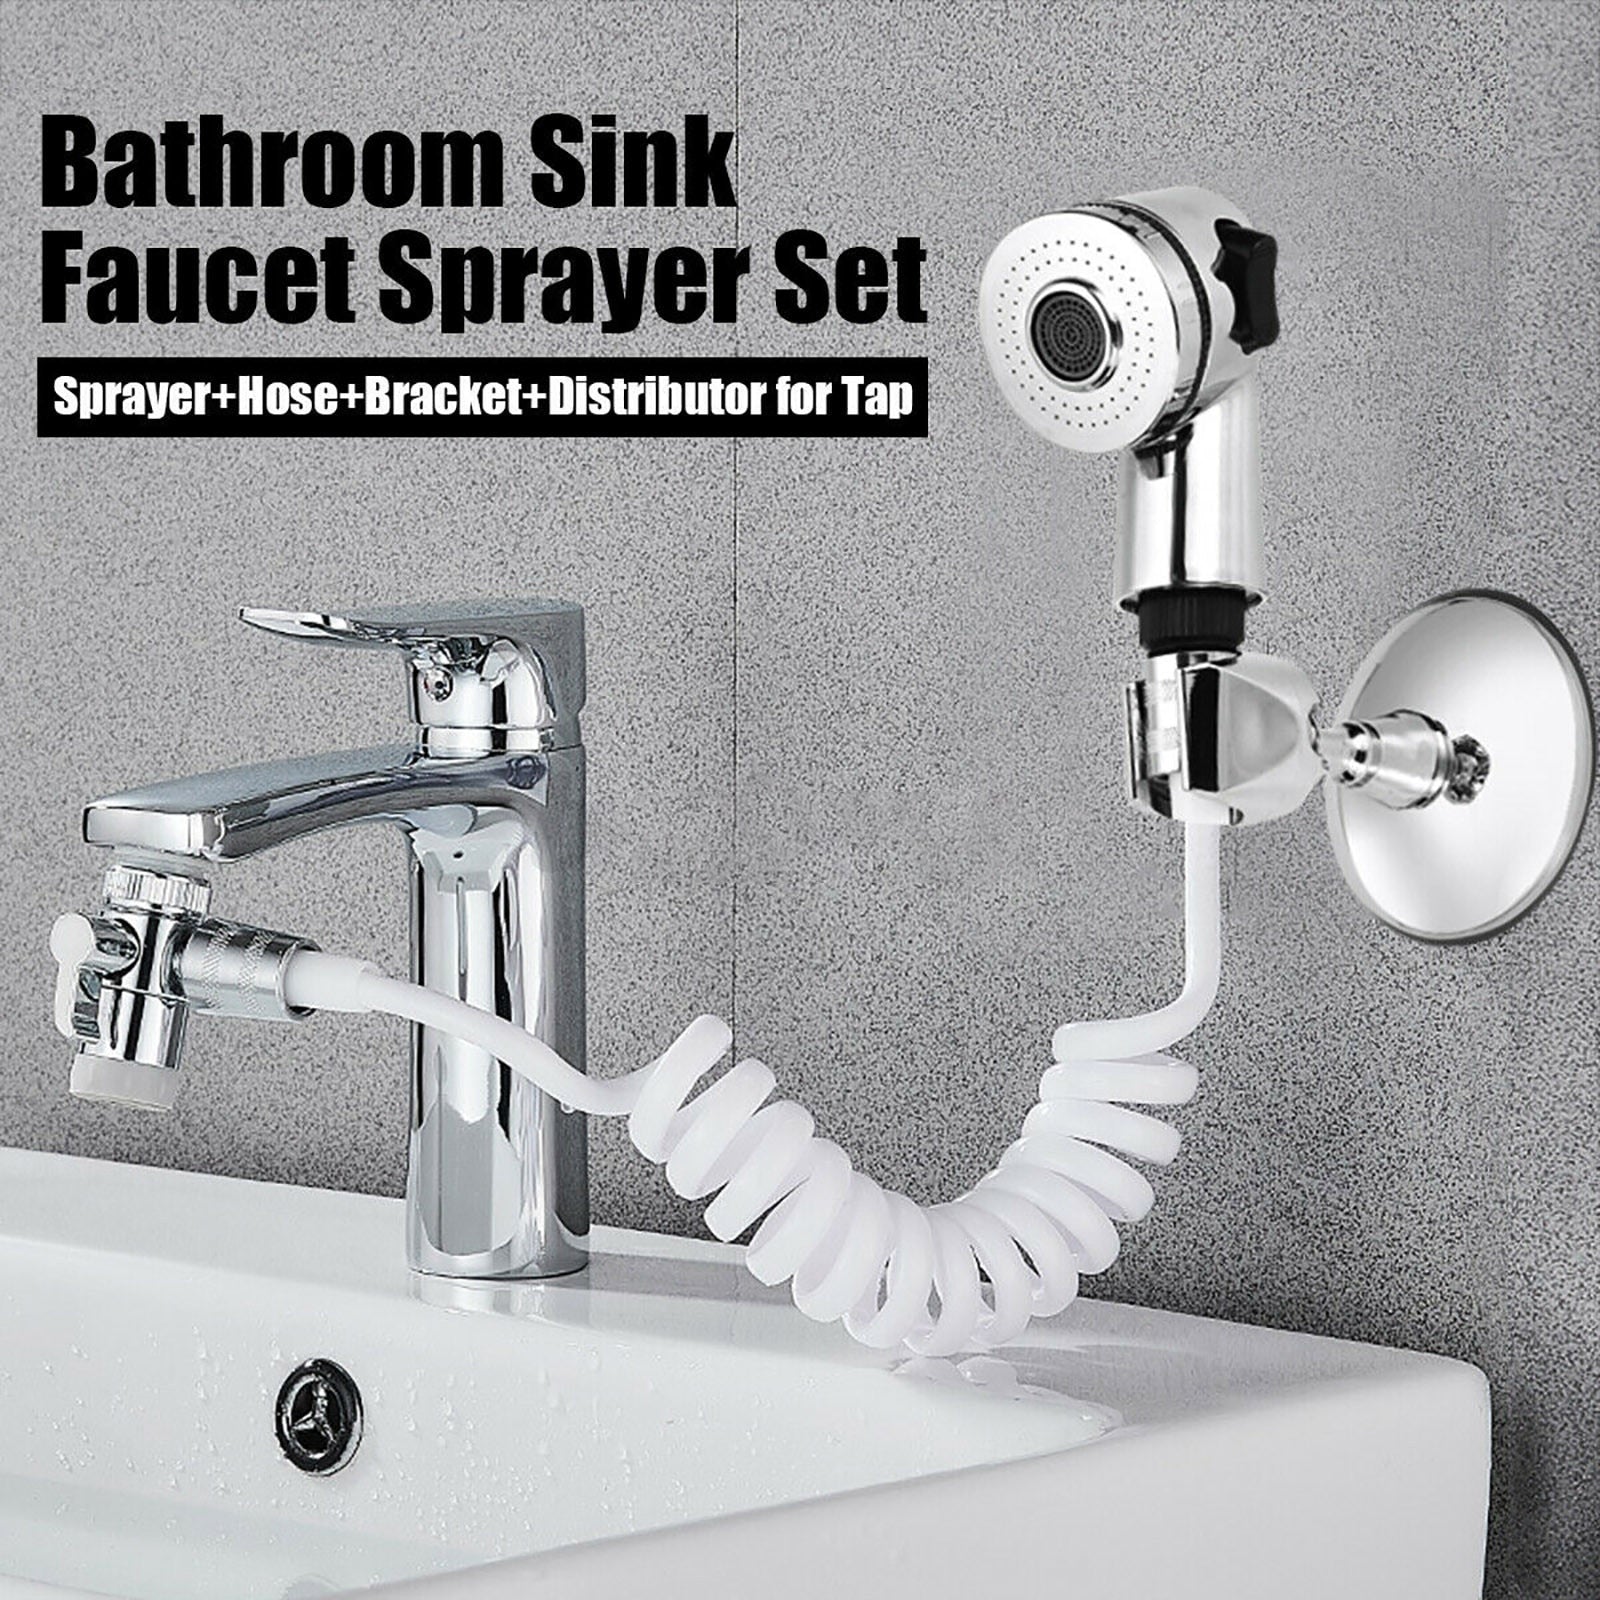 All-in-One Easy Clean Adjustable Bathroom Set